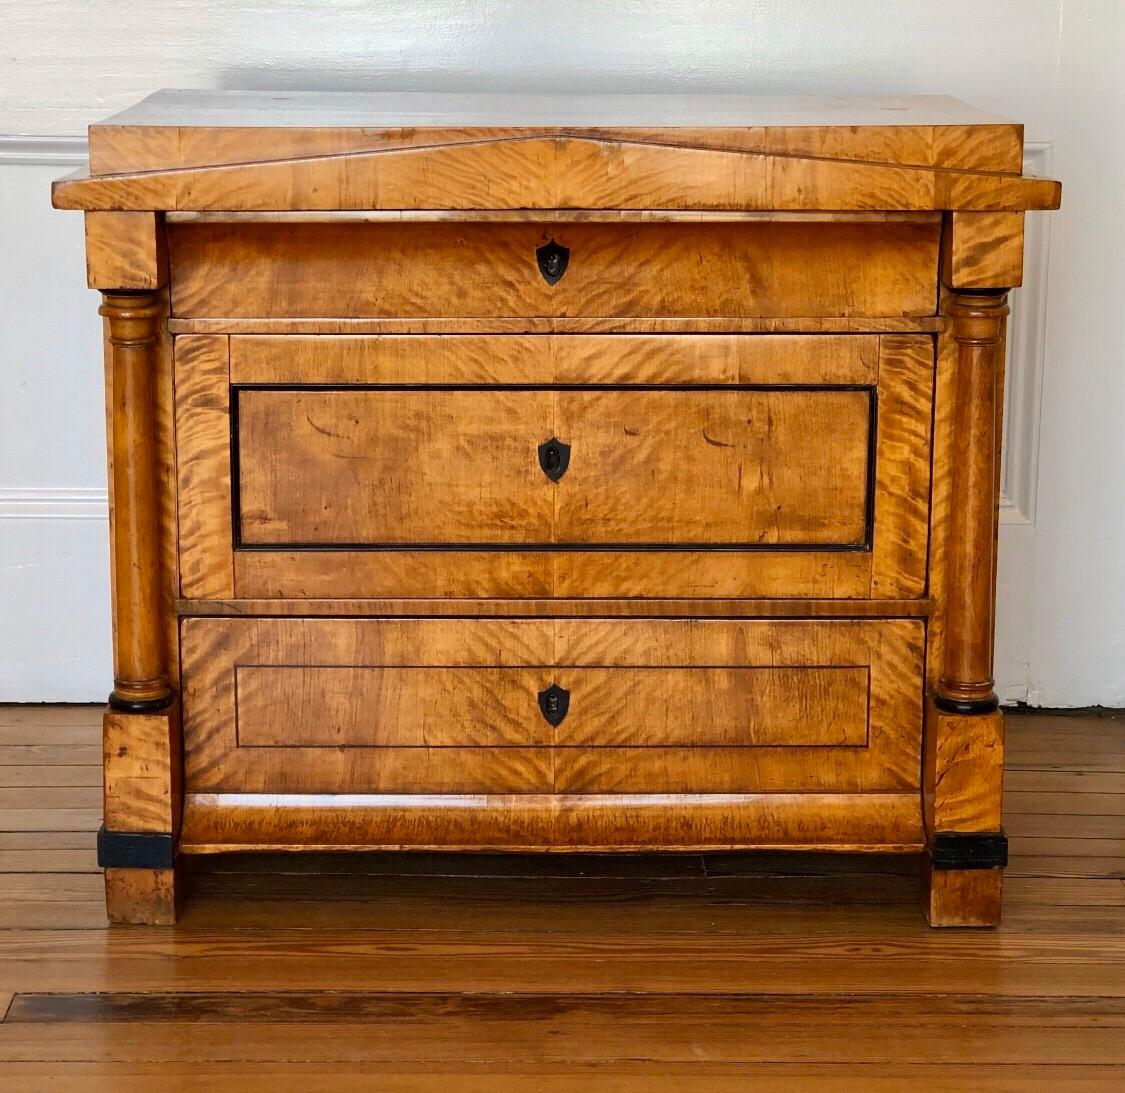 This 19th Century German Biedermeier chest with its classical architecture of doric pediments, and columns has a regal sophistication. The classic proportions and birch root veneer with ebony inlaid highlights of this chest of drawers creates a